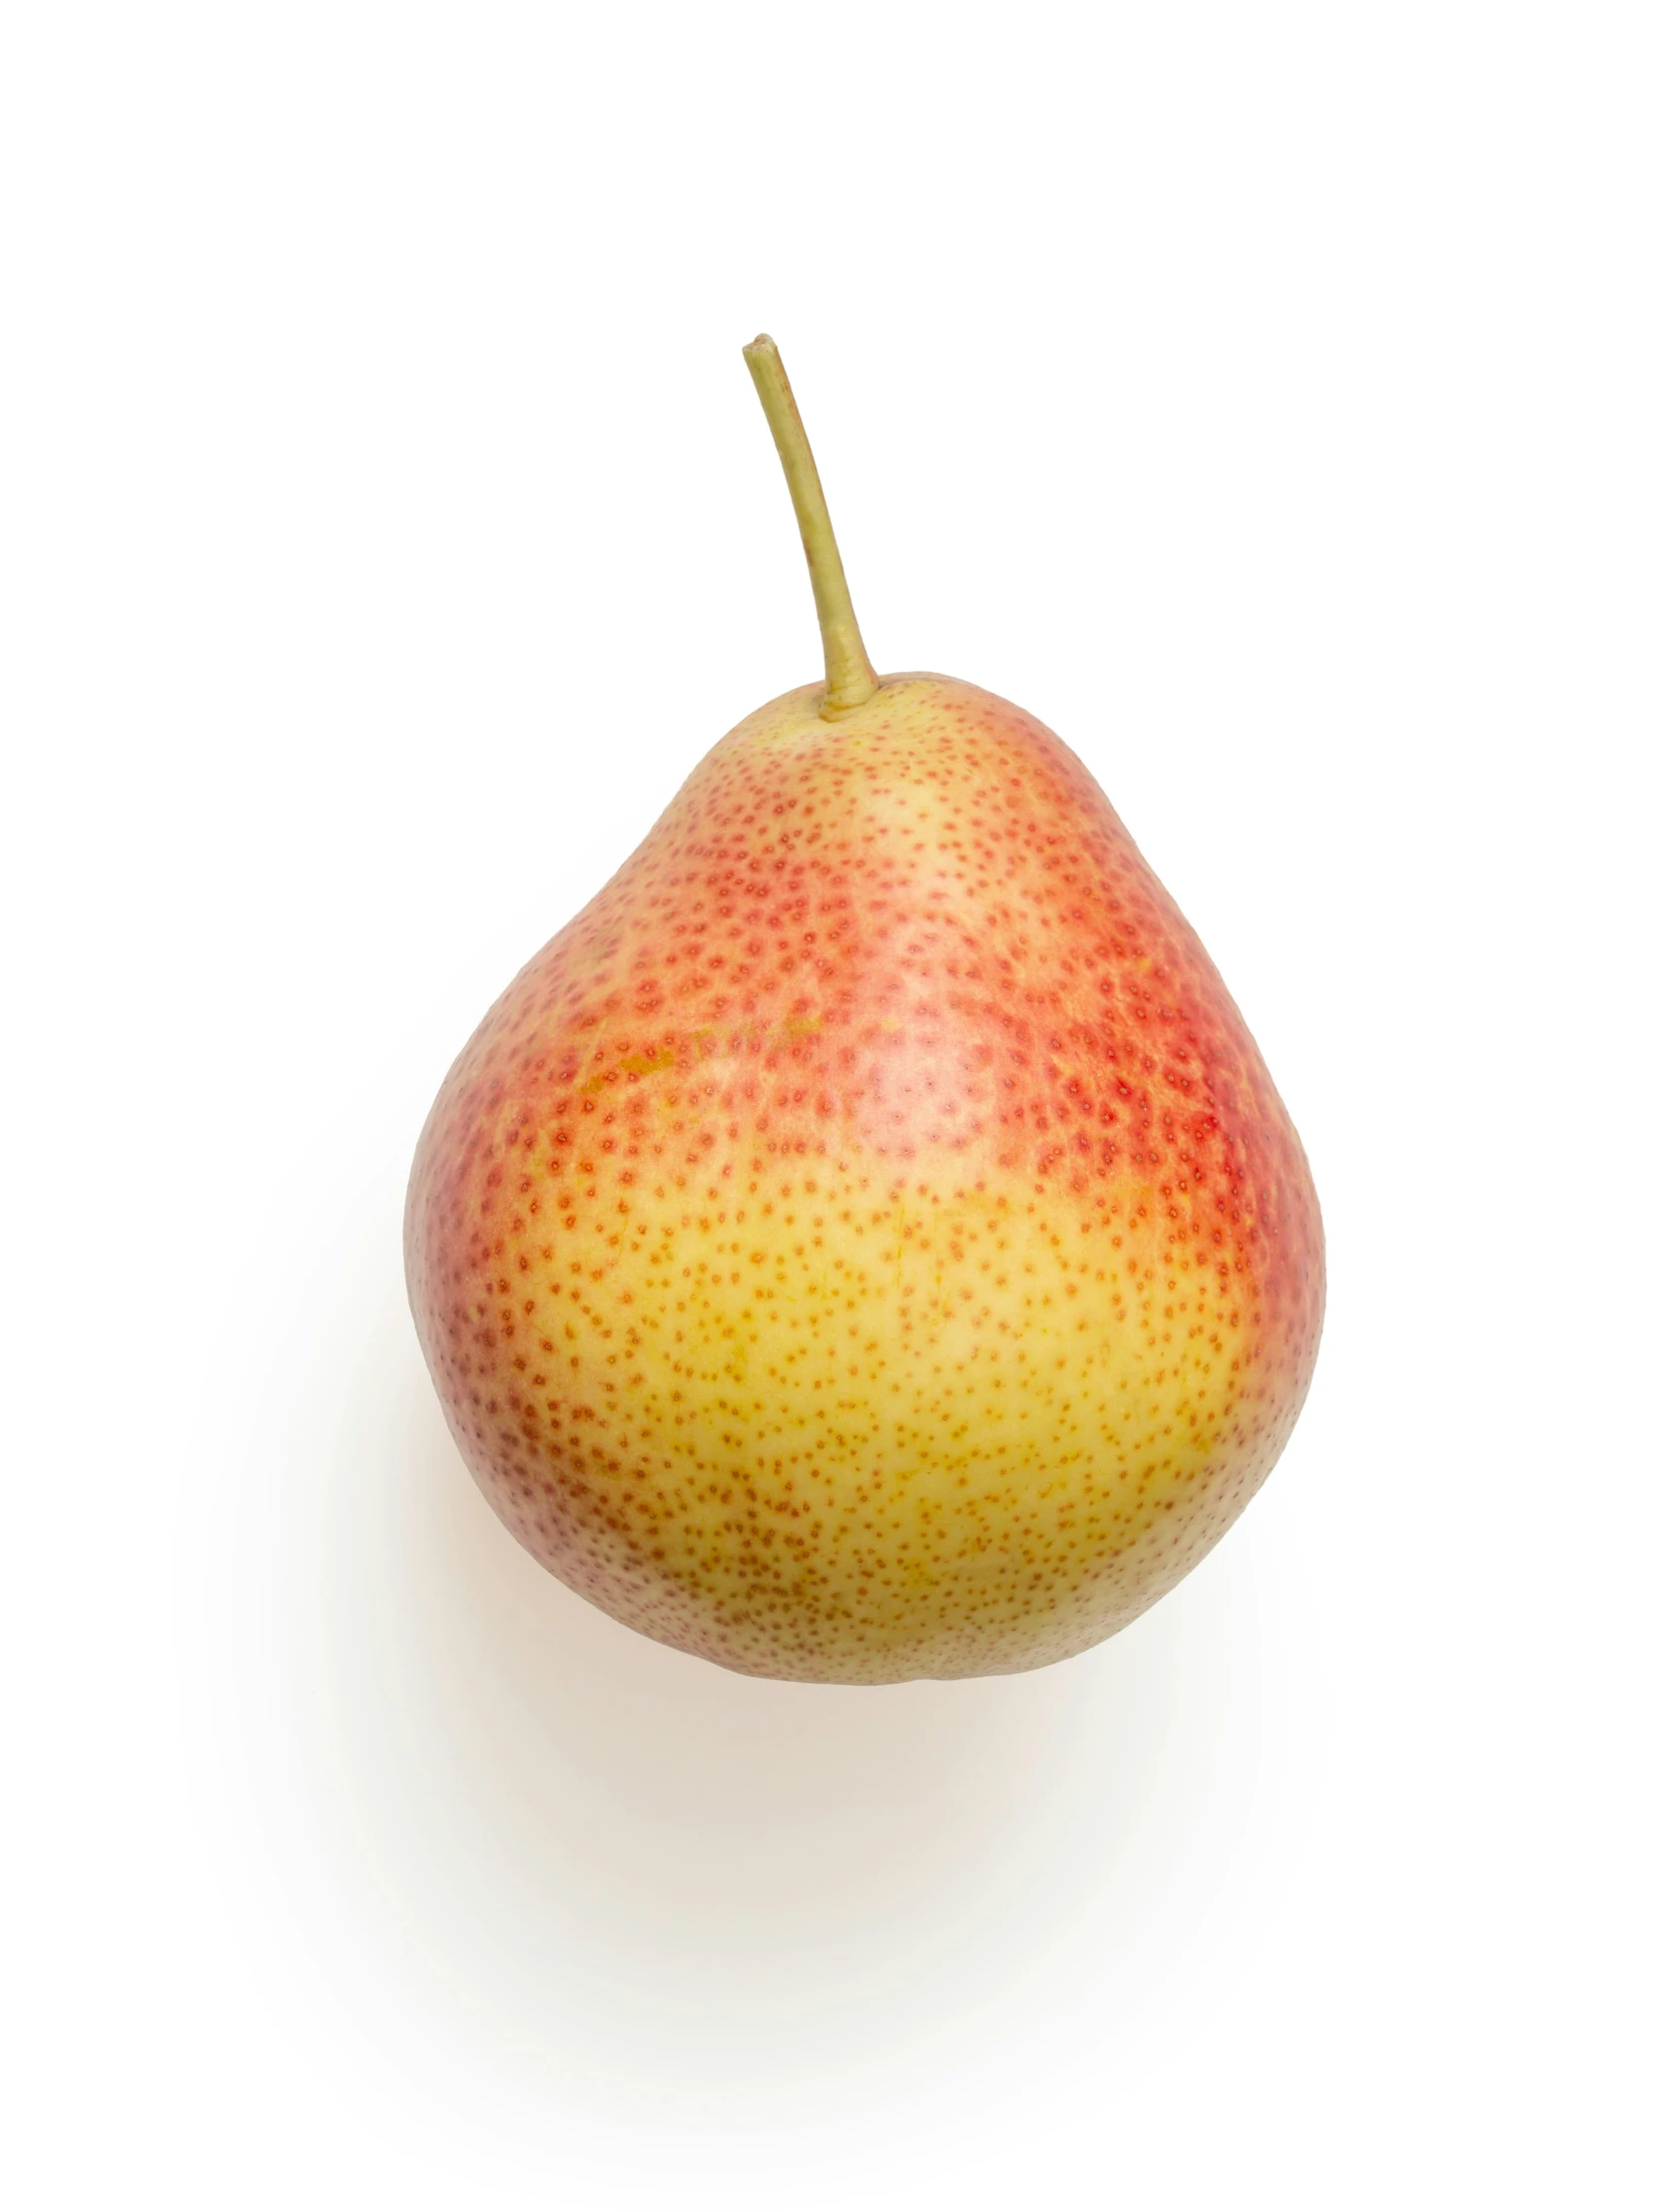 a piece of yellow and red fruit is against a white background